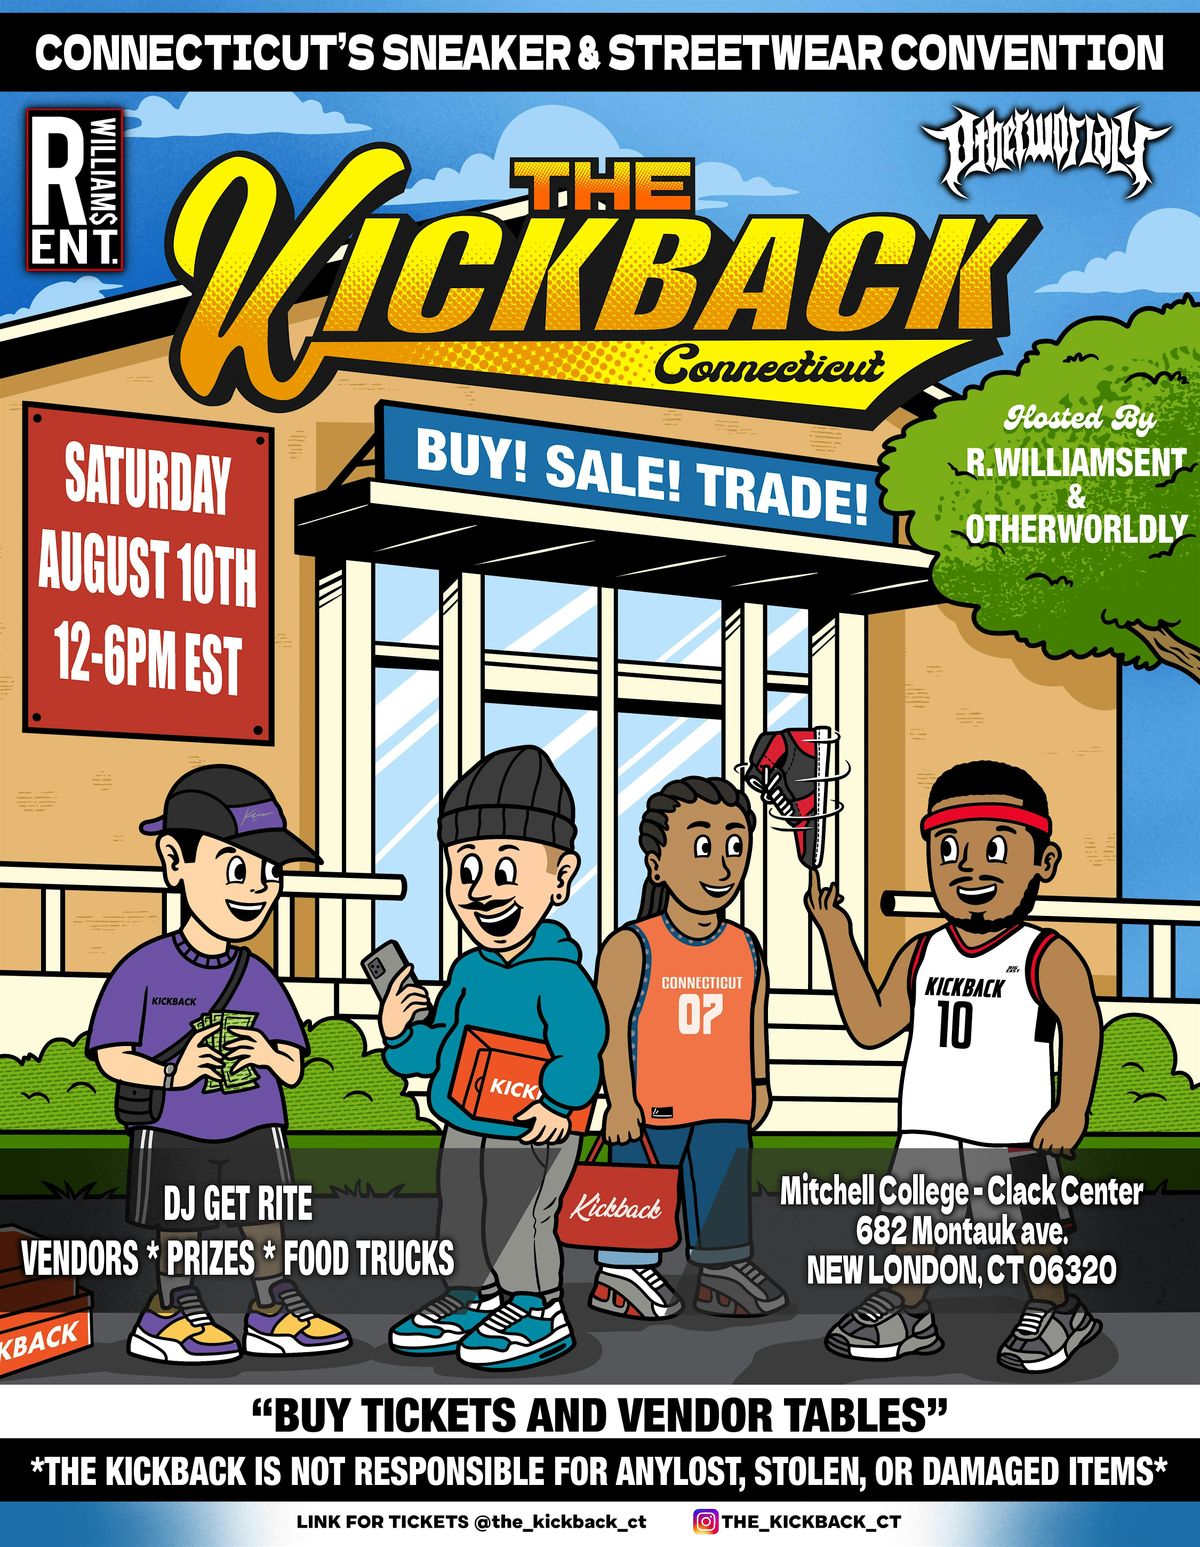 The KickBack CT - Sneaker and Streetwear Convention